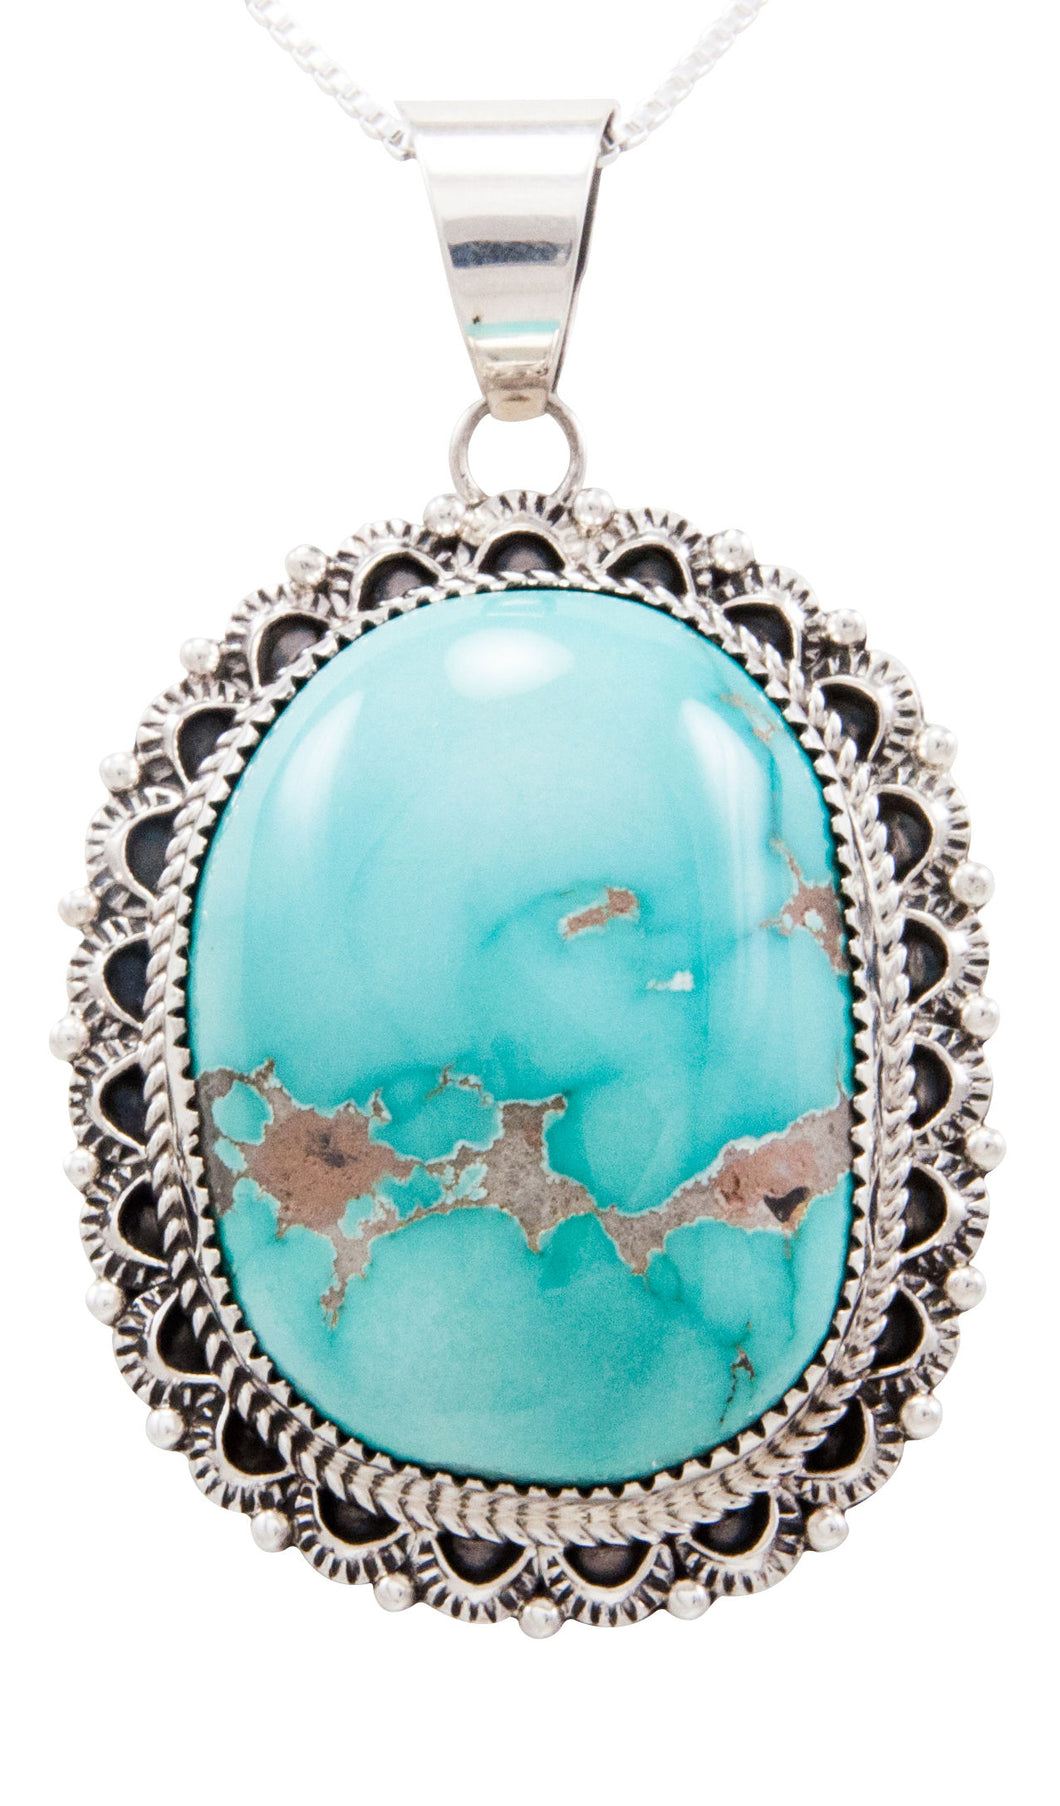 Navajo Native American Royston Turquoise Pendant Necklace by Livingston SKU232590